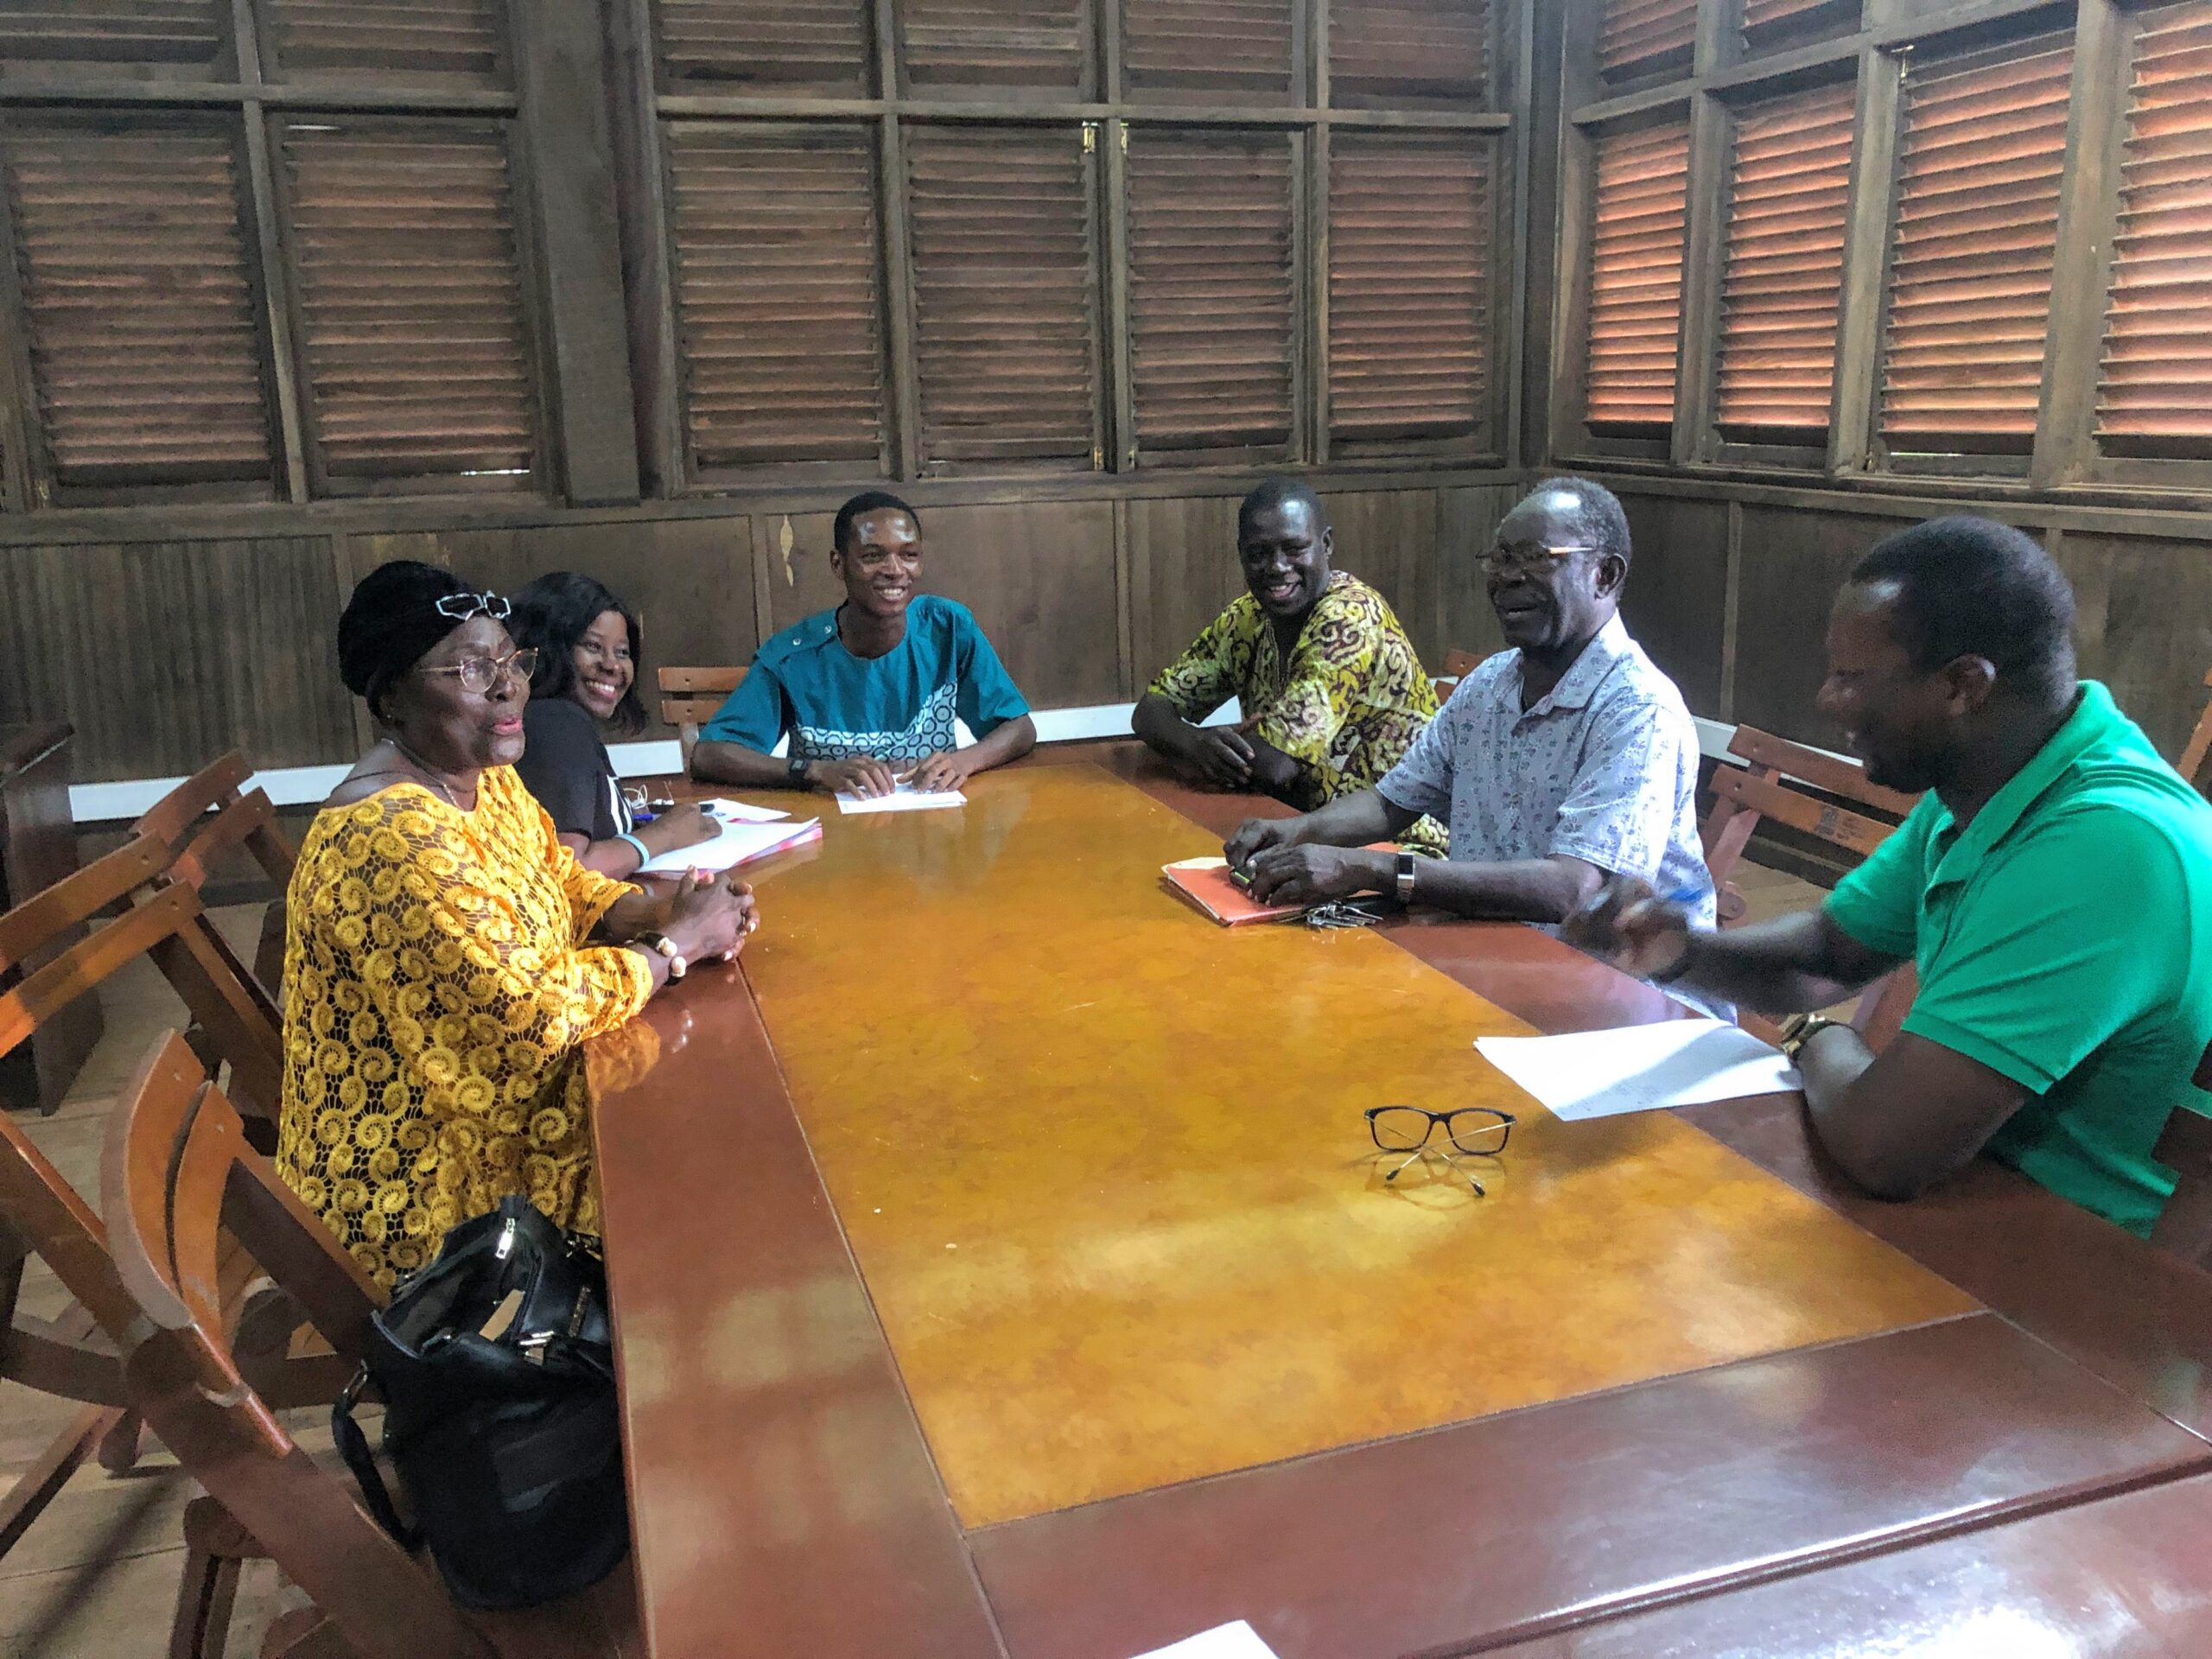 Isaac Asomah chairing a meeting of Businessmen and women at Kakum National Park Visitor Centre